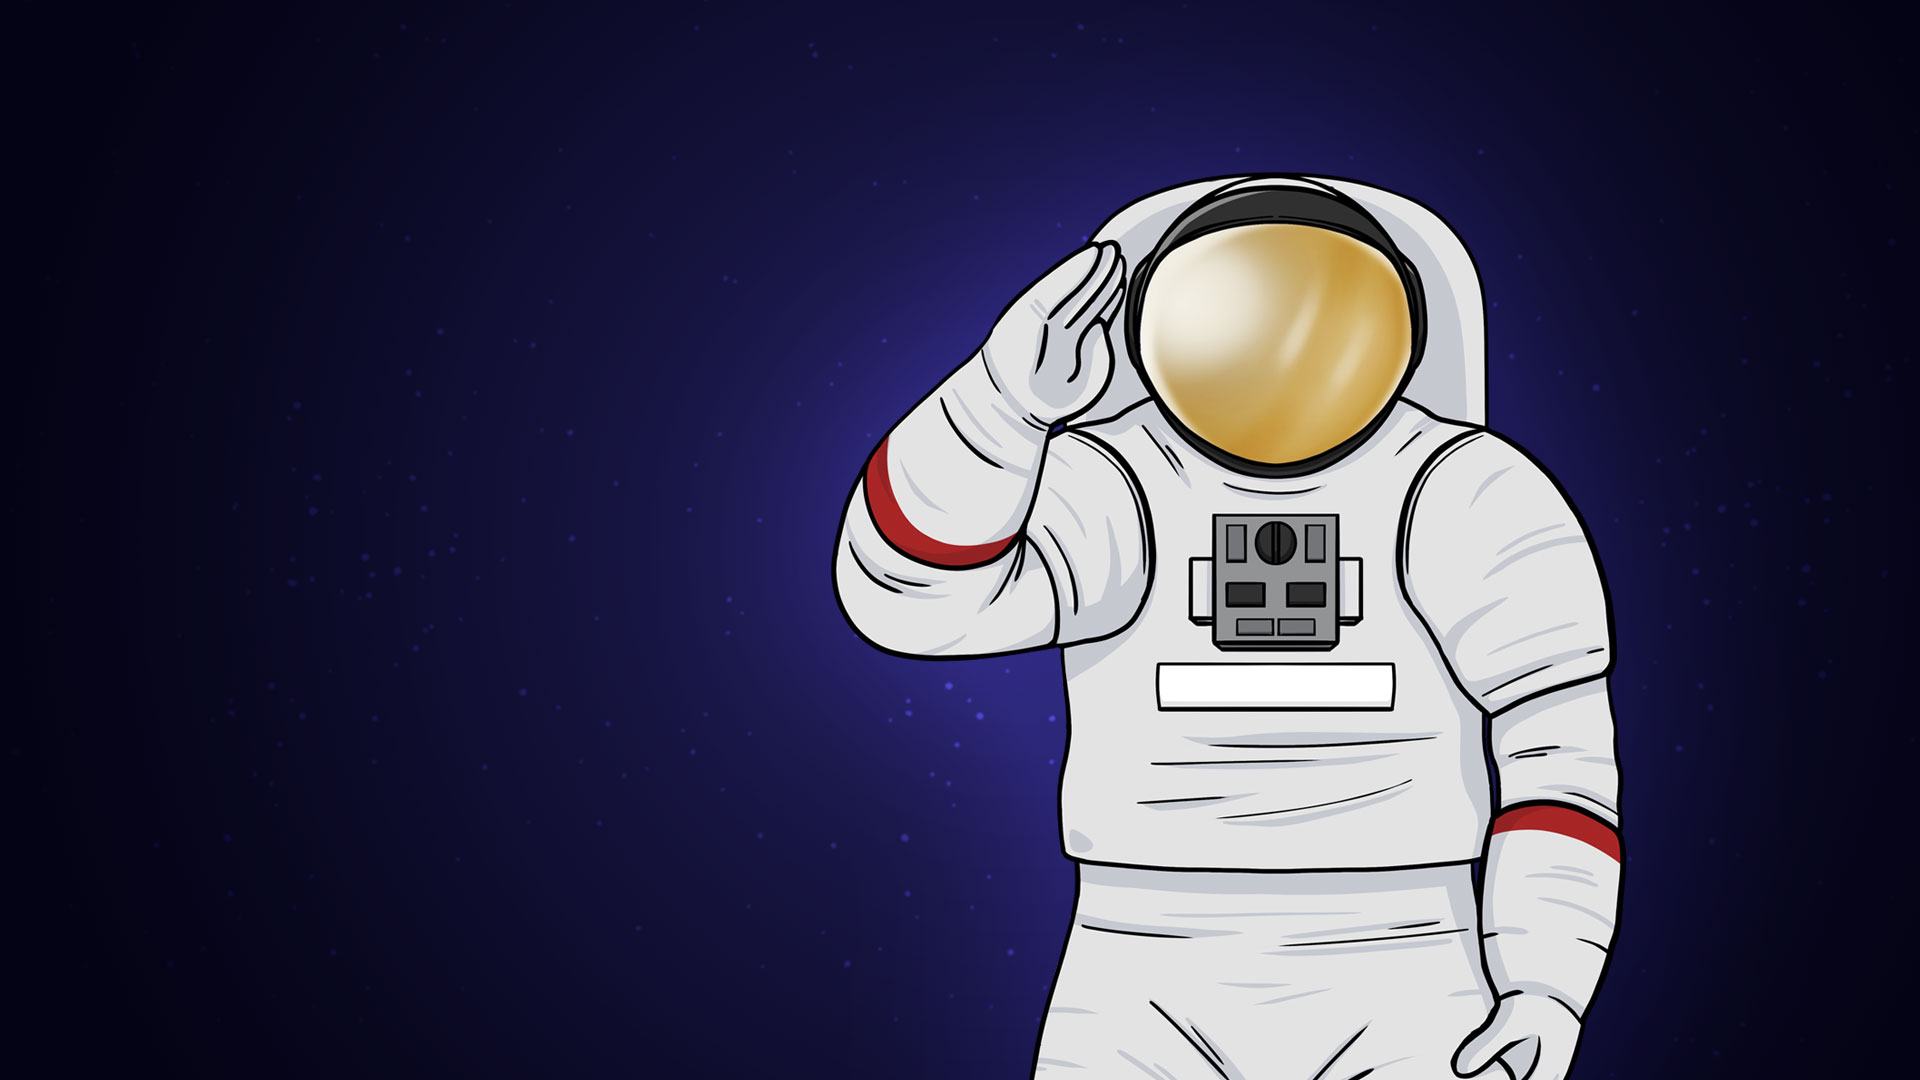 An artist's illustration of an astronaut in a spacesuit giving a salute.